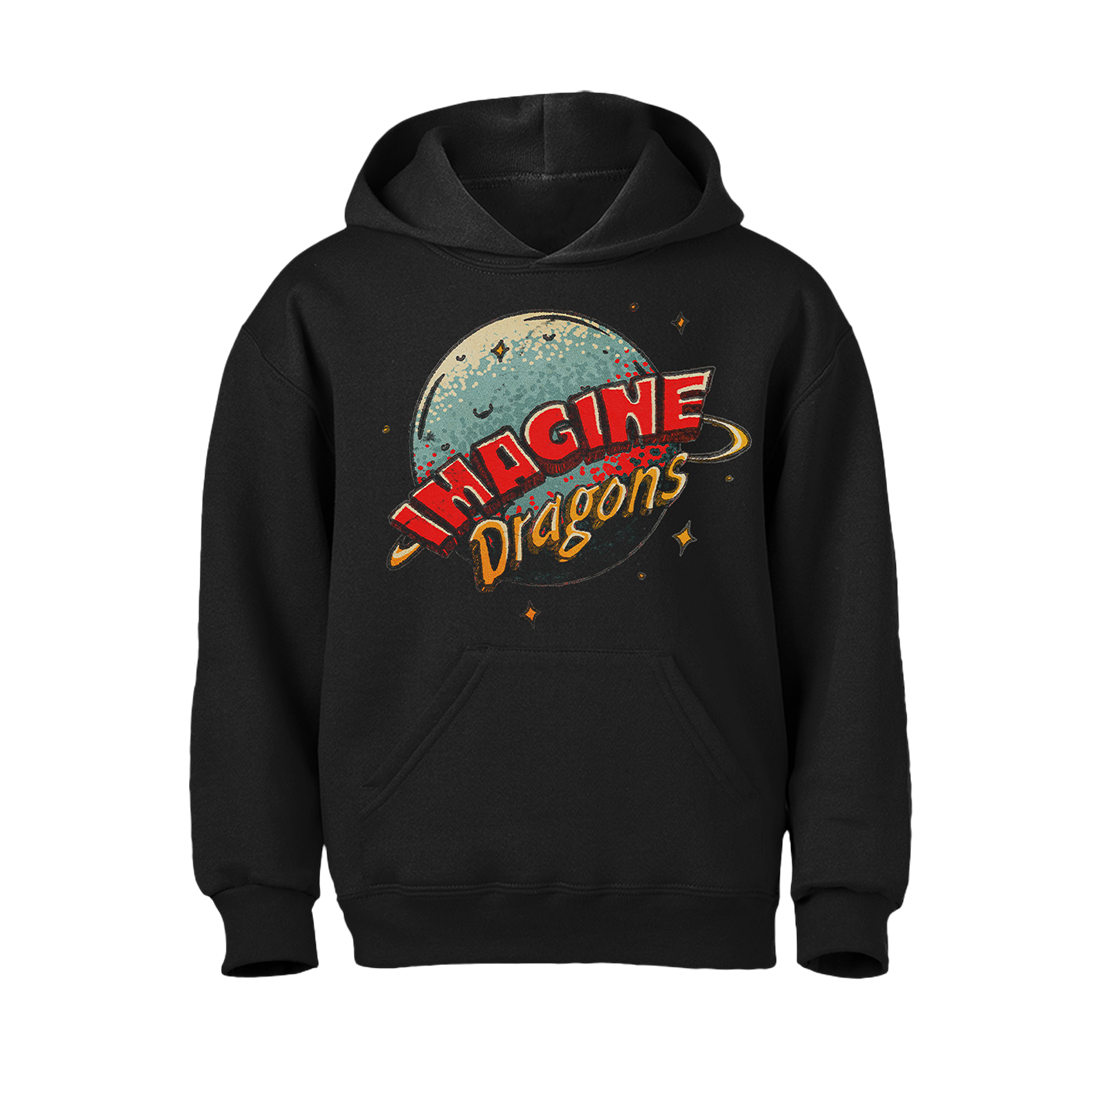 Imagine Dragons - Planet Youth Hoodie